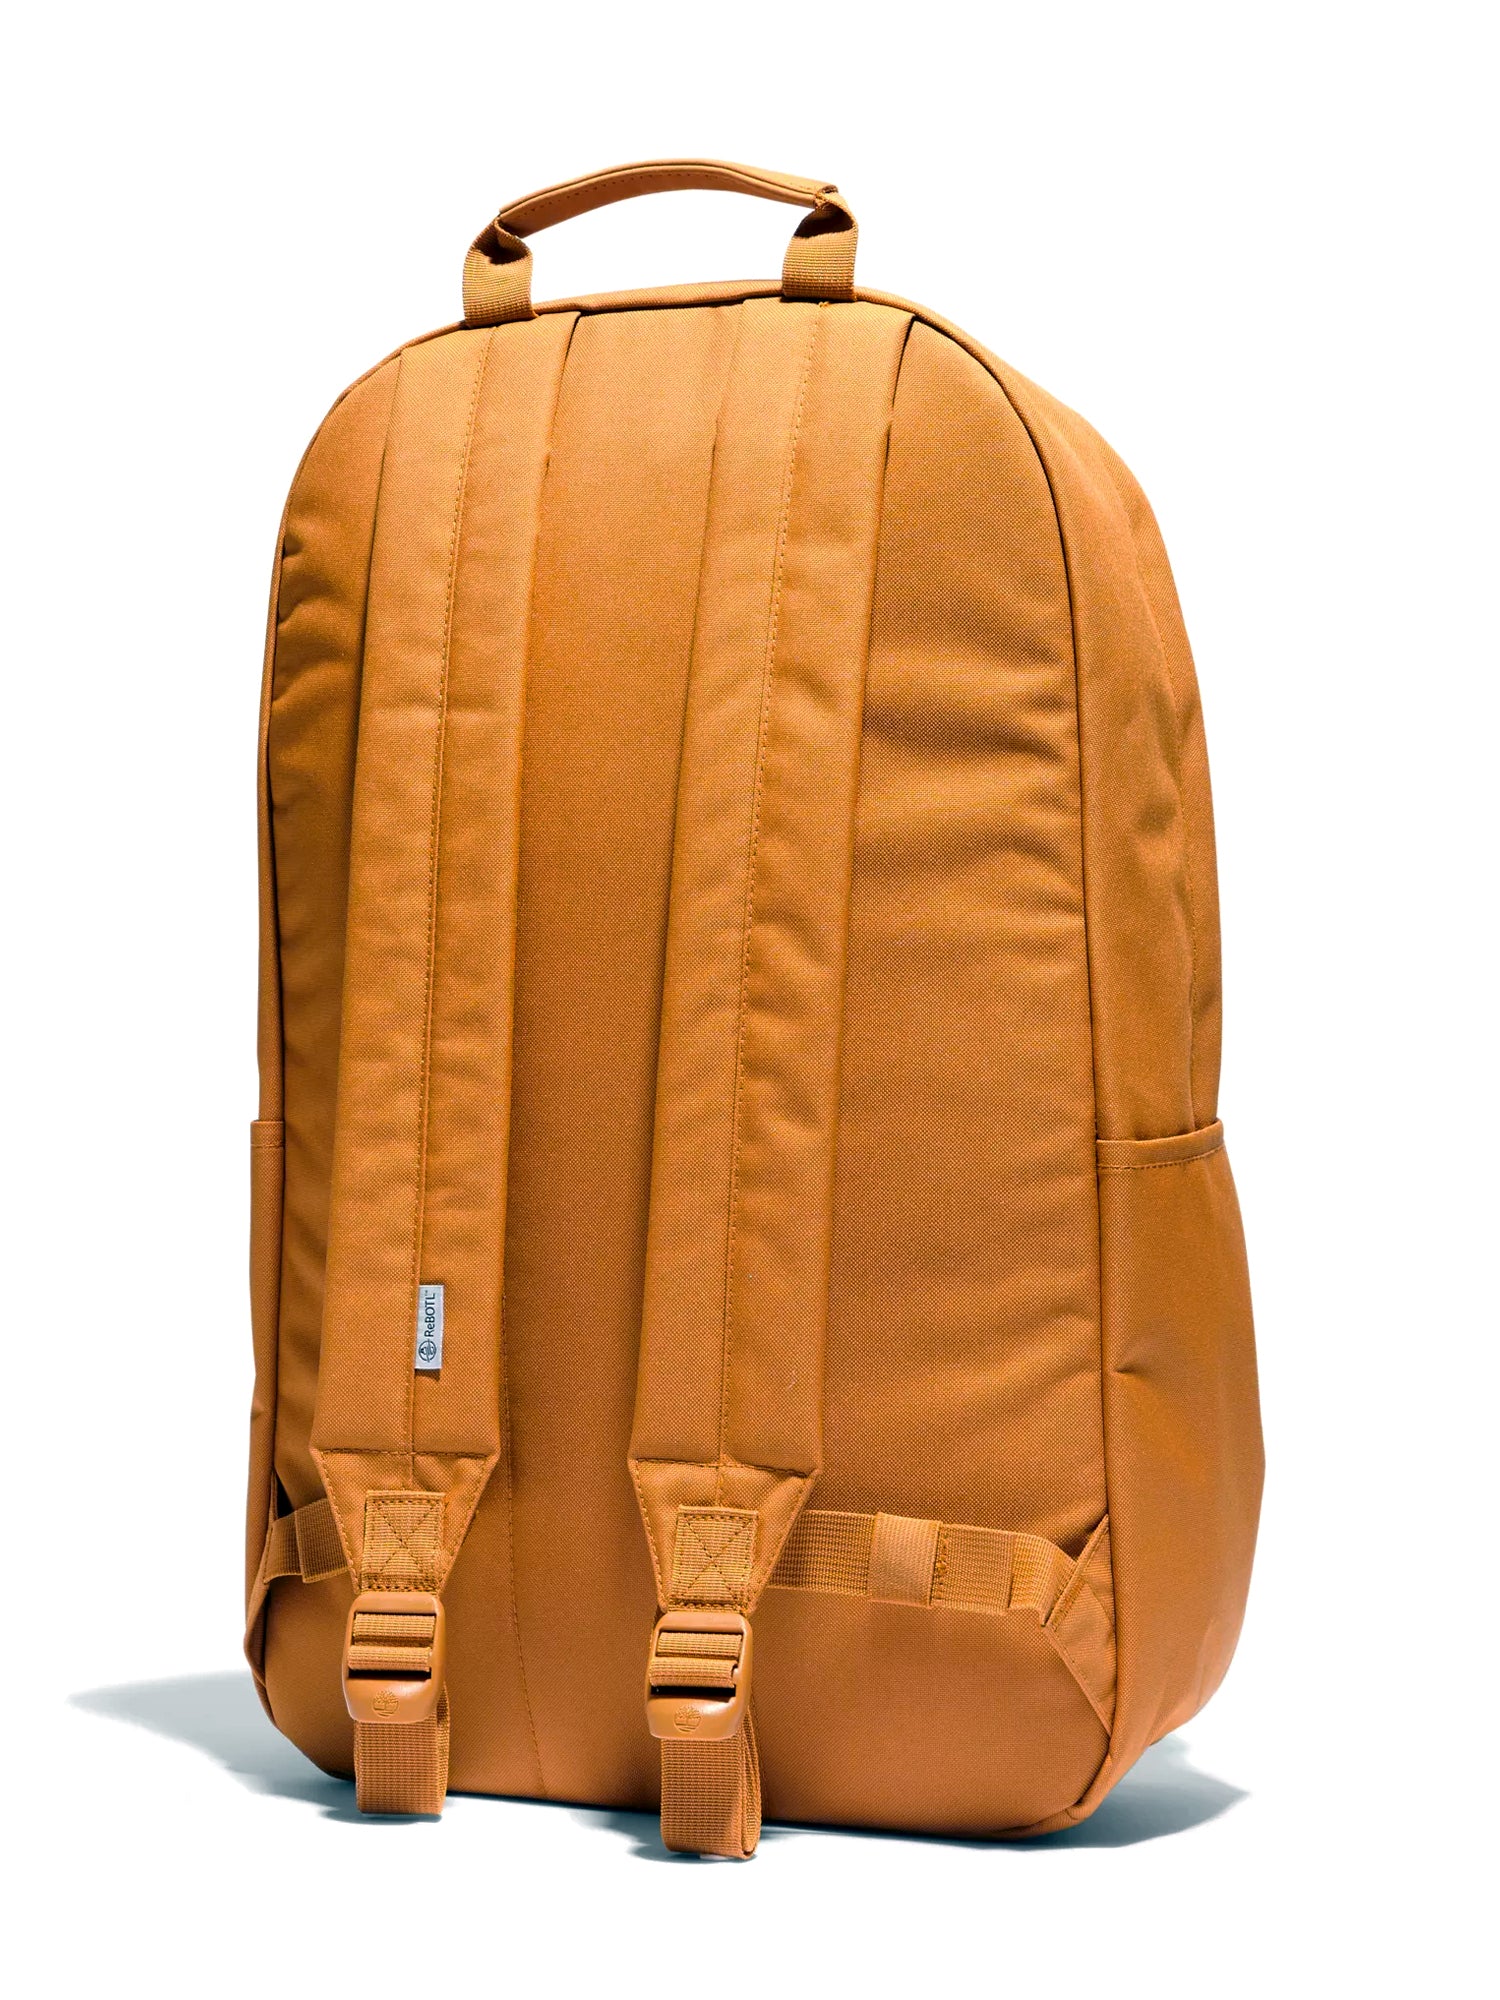 TIMBERLAND 27 L - CLEARANCE